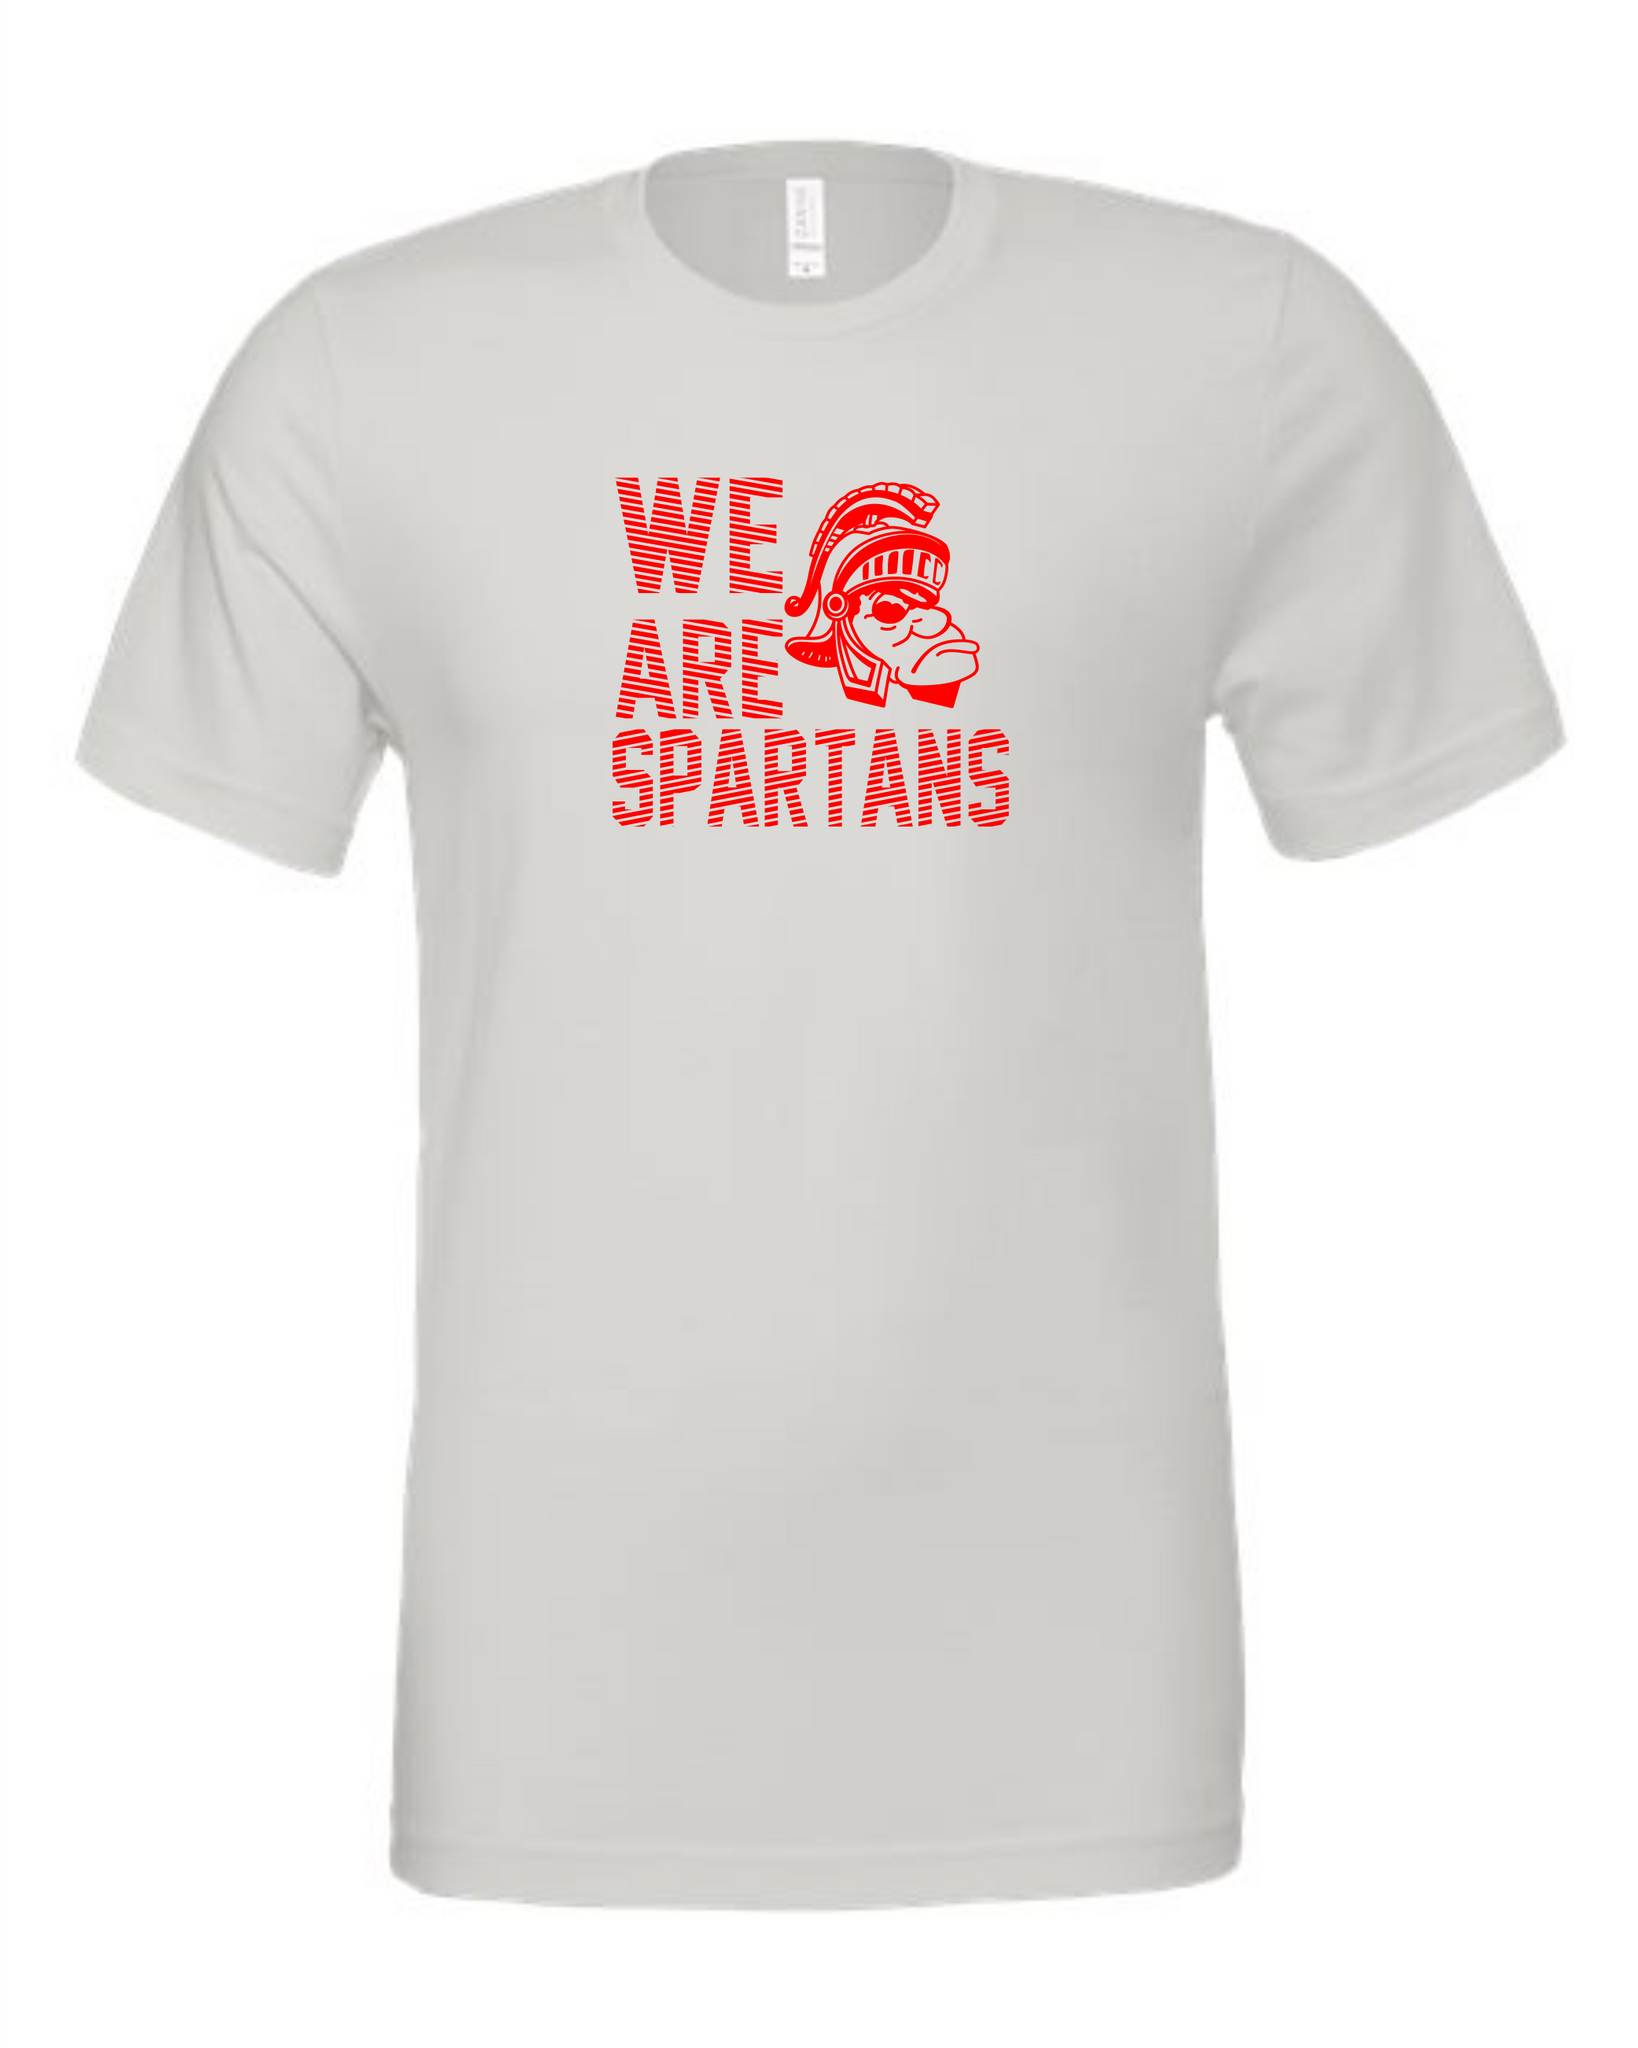 We Are Spartans